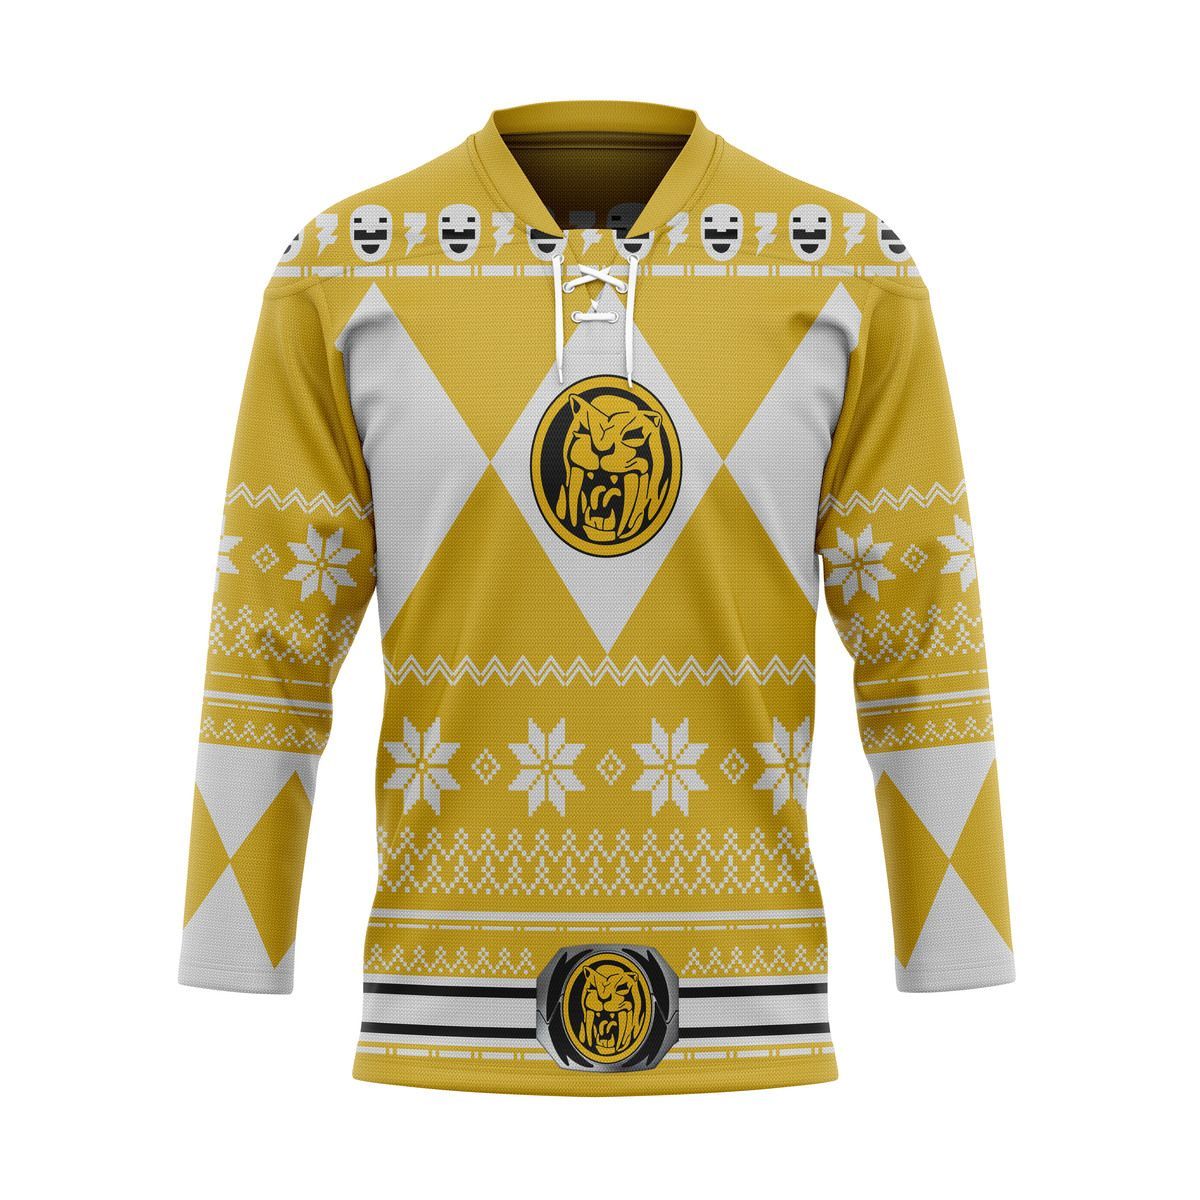 Check out our collection of unique and stylish hockey jerseys from all over the world 146